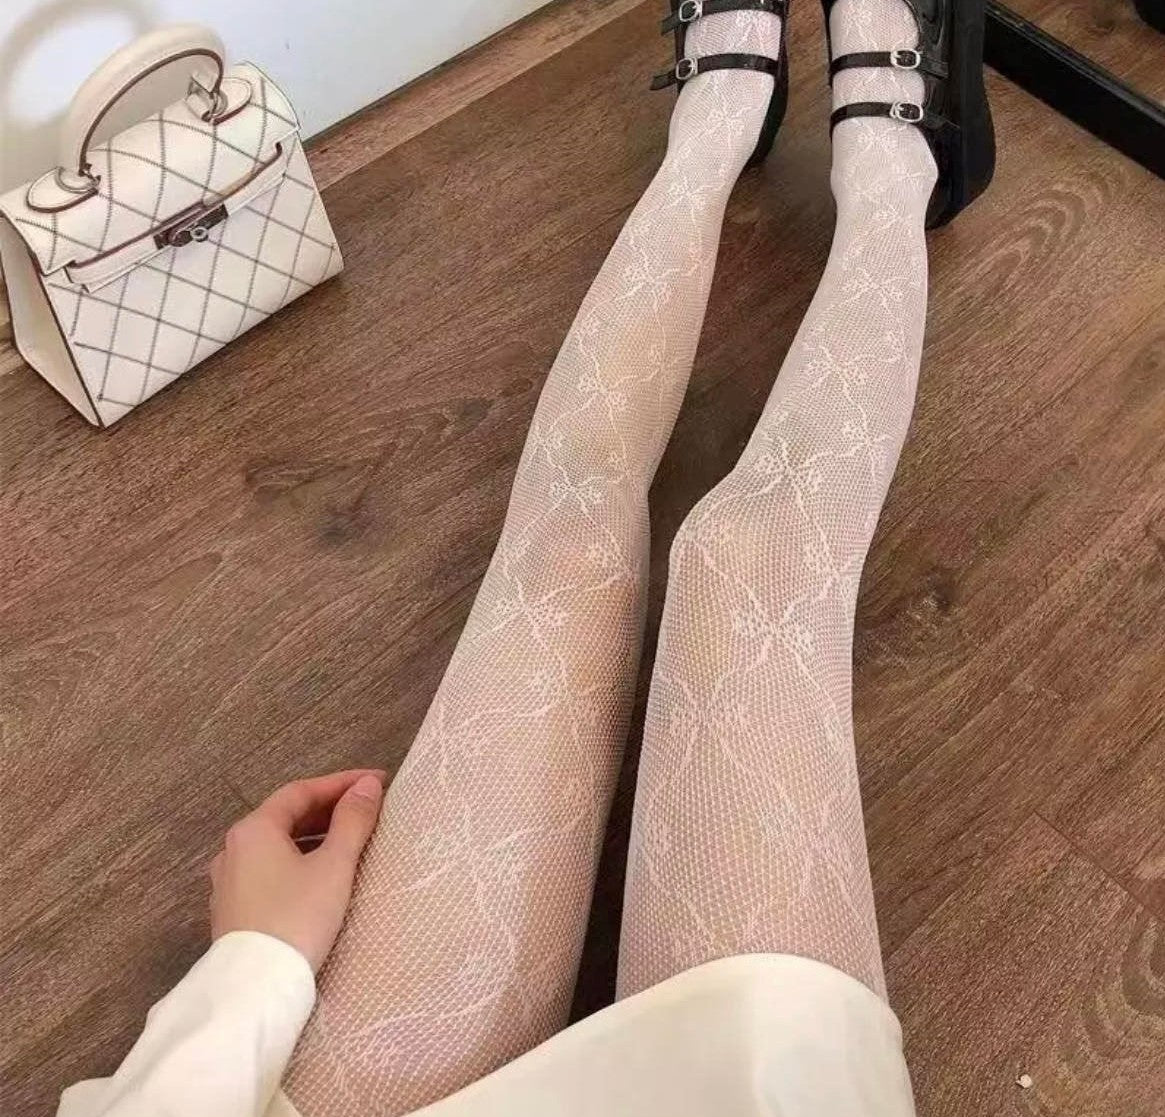 Bow Tique Net Tights - White 17